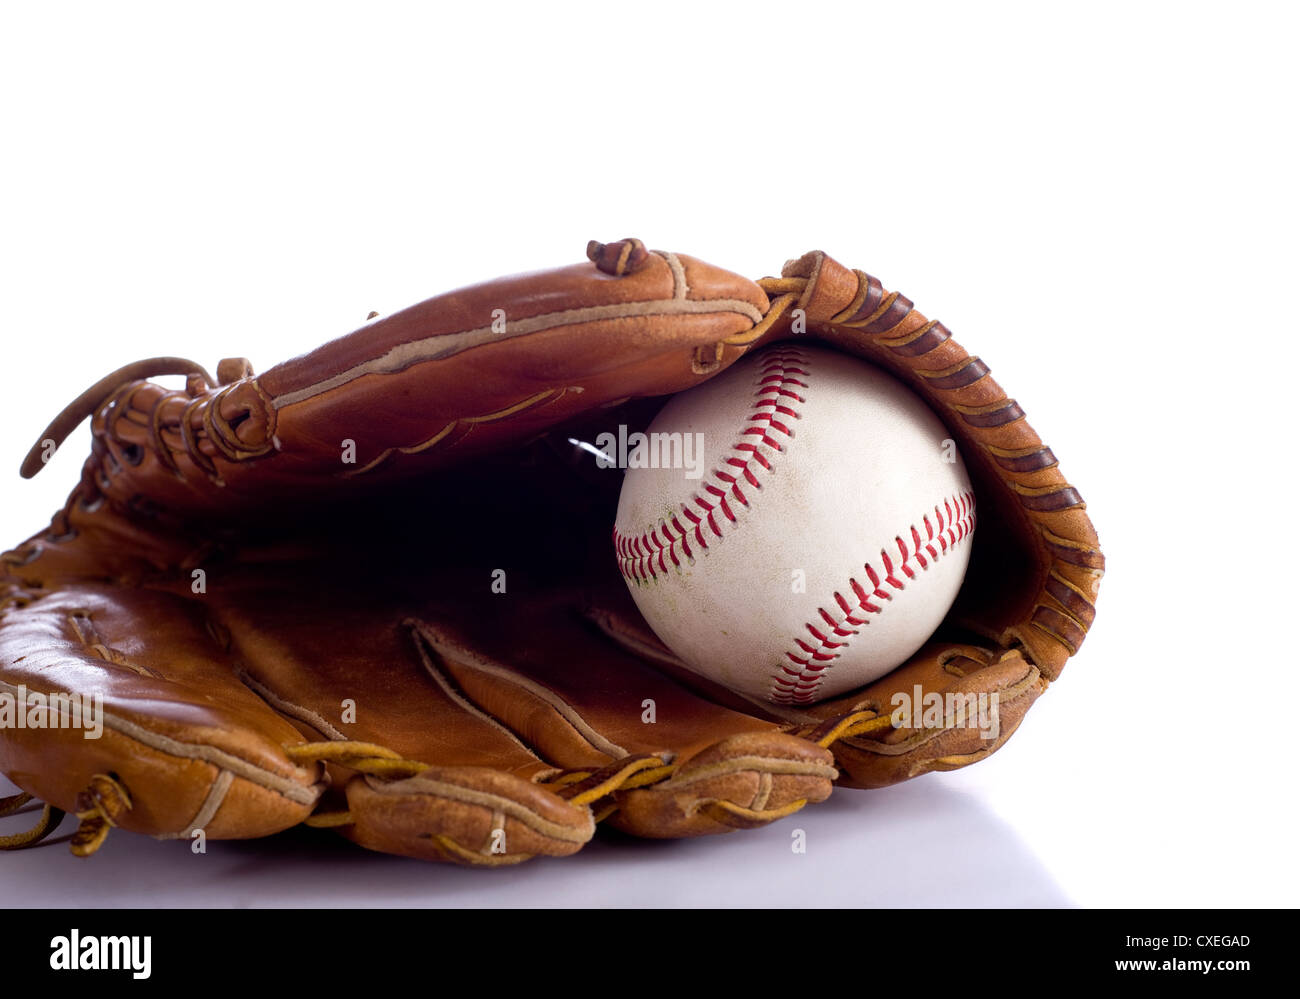 A leather baseball glove and a baseball on a white background with copy space Stock Photo